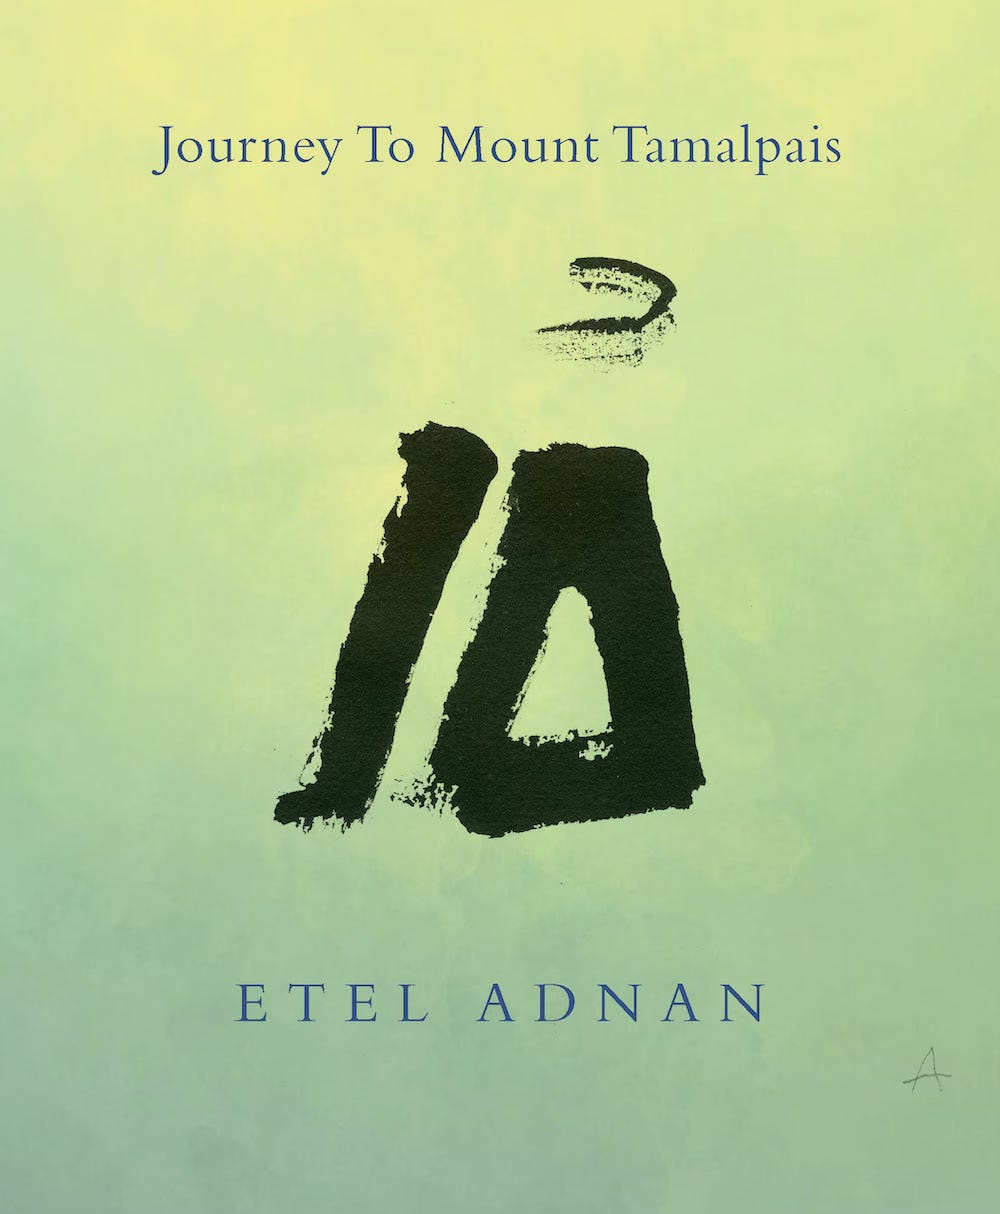 The cover of Journey to Mount Tamalpais by Etel Adnan. The background of the cover is a gradient from grass green at the bottom to yellow-green at the top. In the center of the cover is a calligraphic brush ink rendering of the triangular shapes of Mount Tamalpais. 